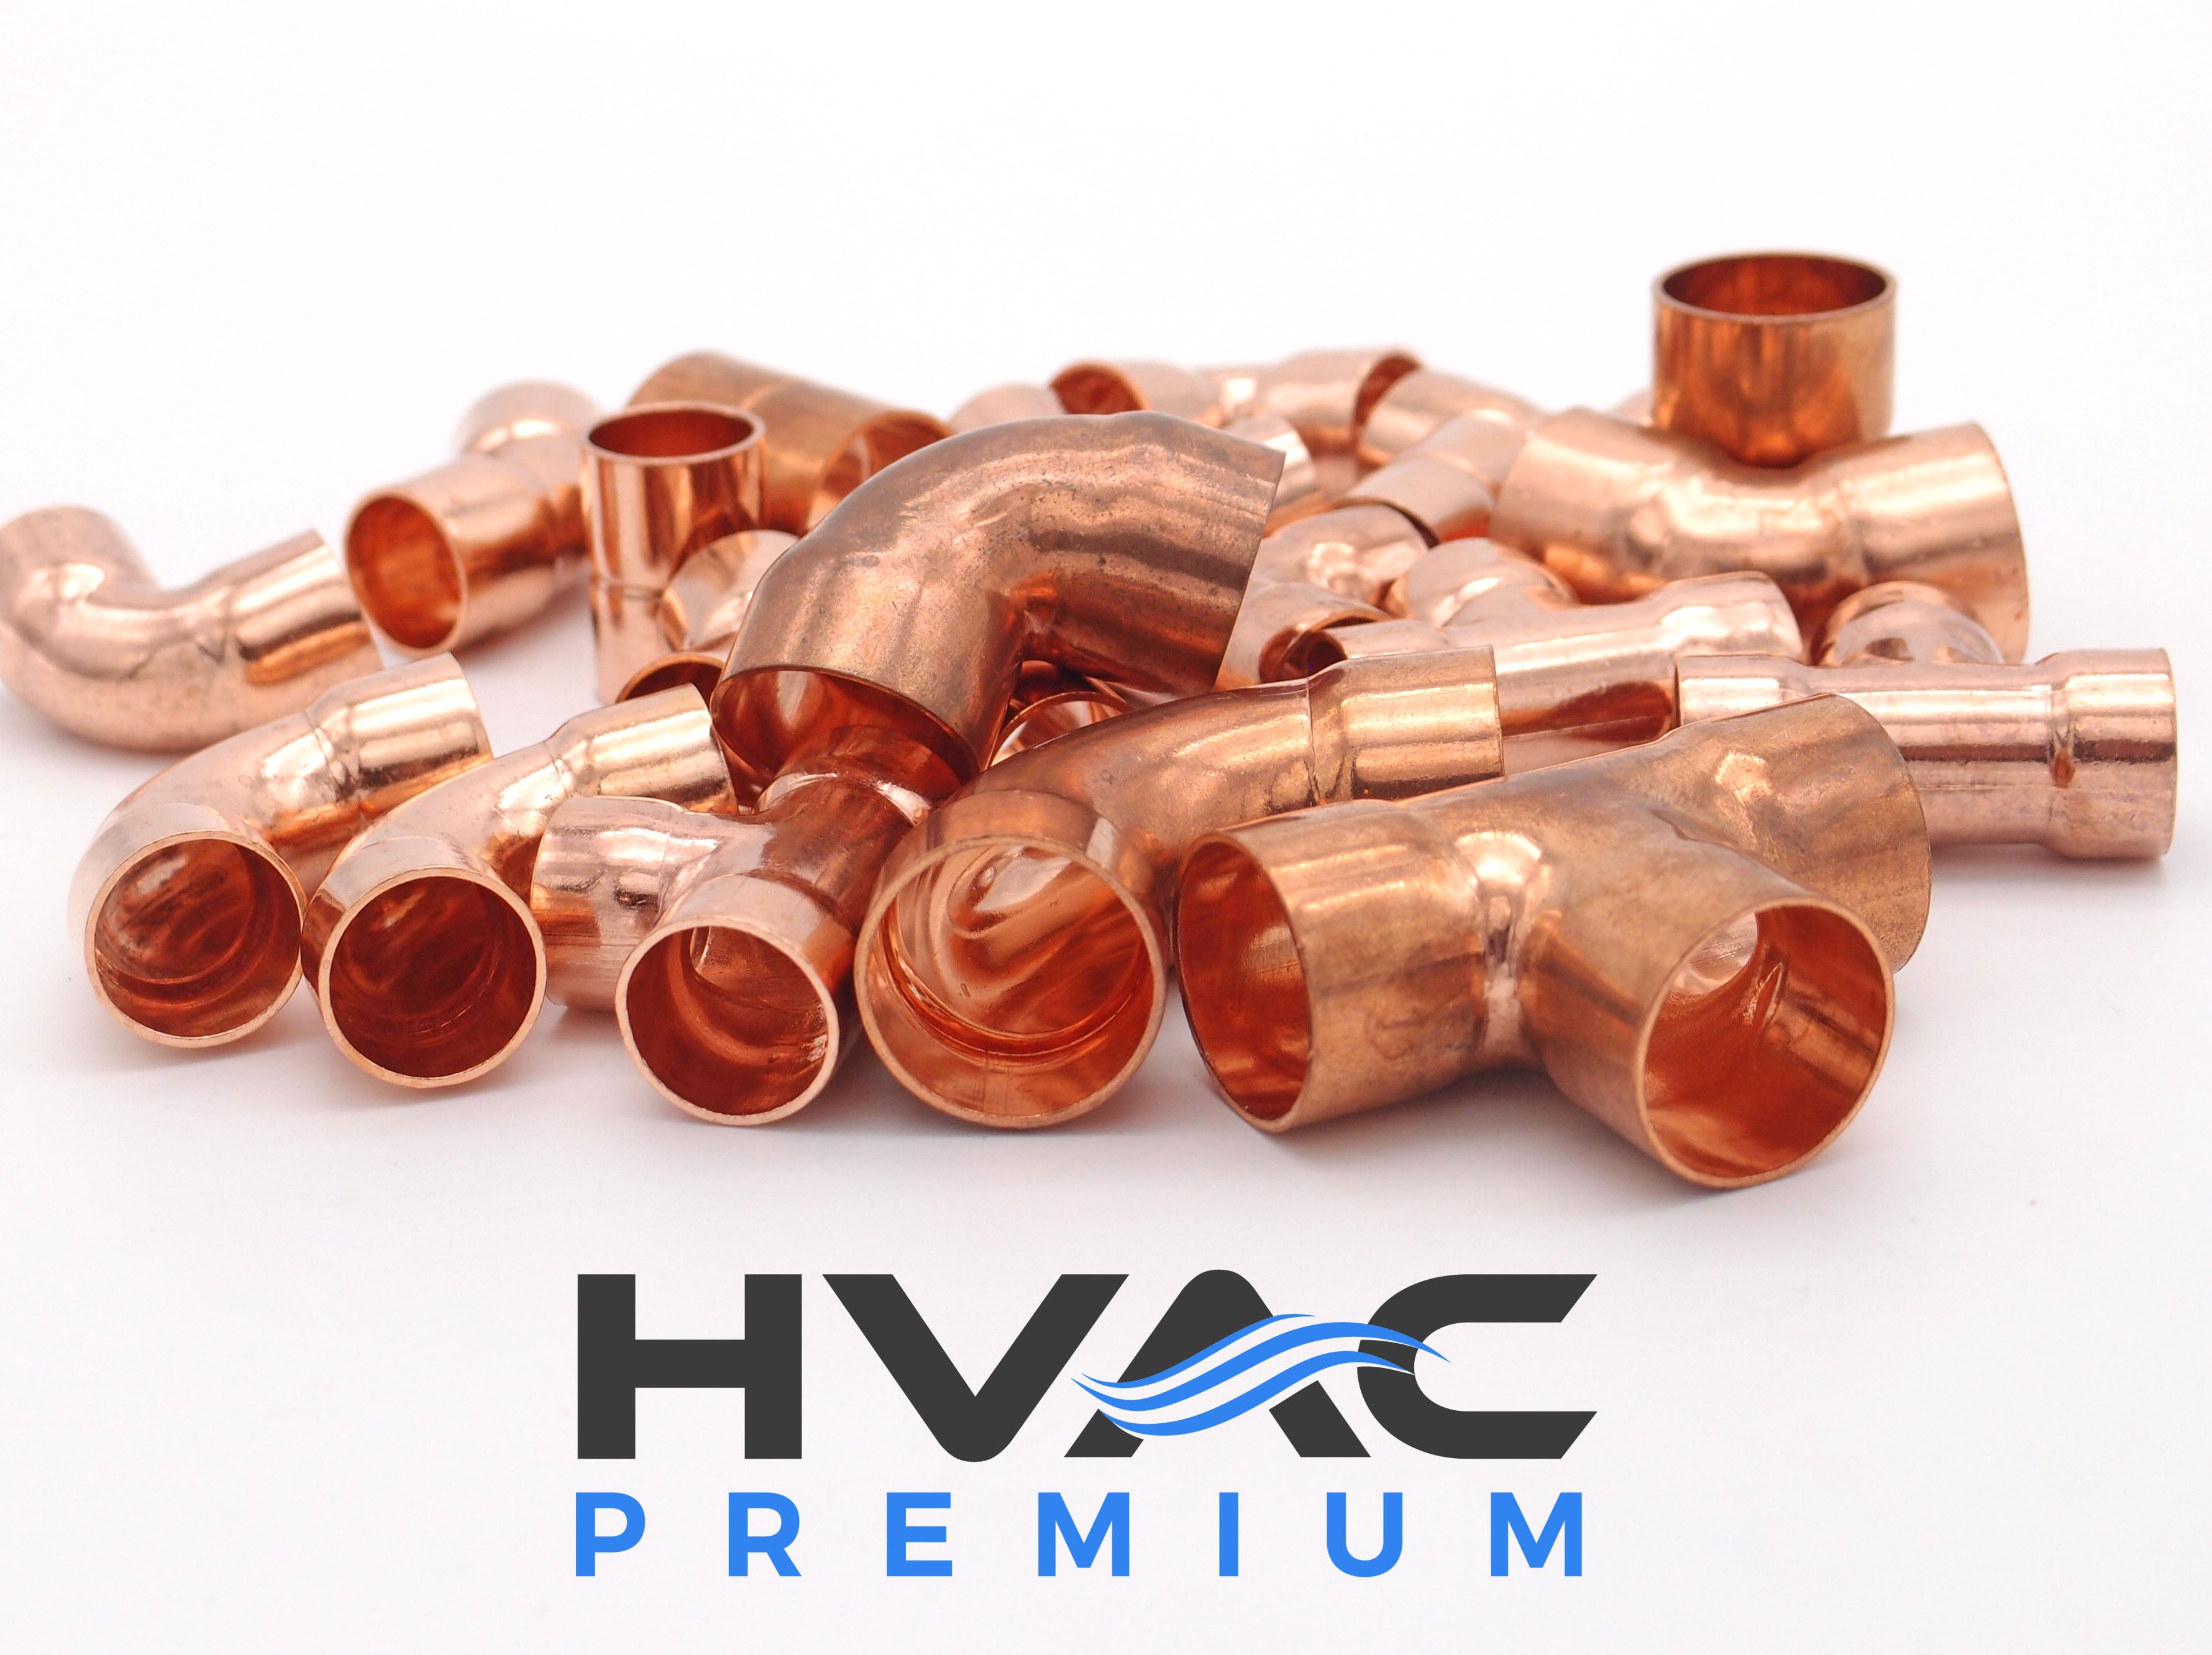 Copper Fitting 1/2 to 3/8 (HVAC Dimensions) Reducer / Increaser Copper Coupling & HVAC – 3/8 to 1/4 (Plumbing Inner Dimensions) 99.9% Pure Copper - 5 Pack